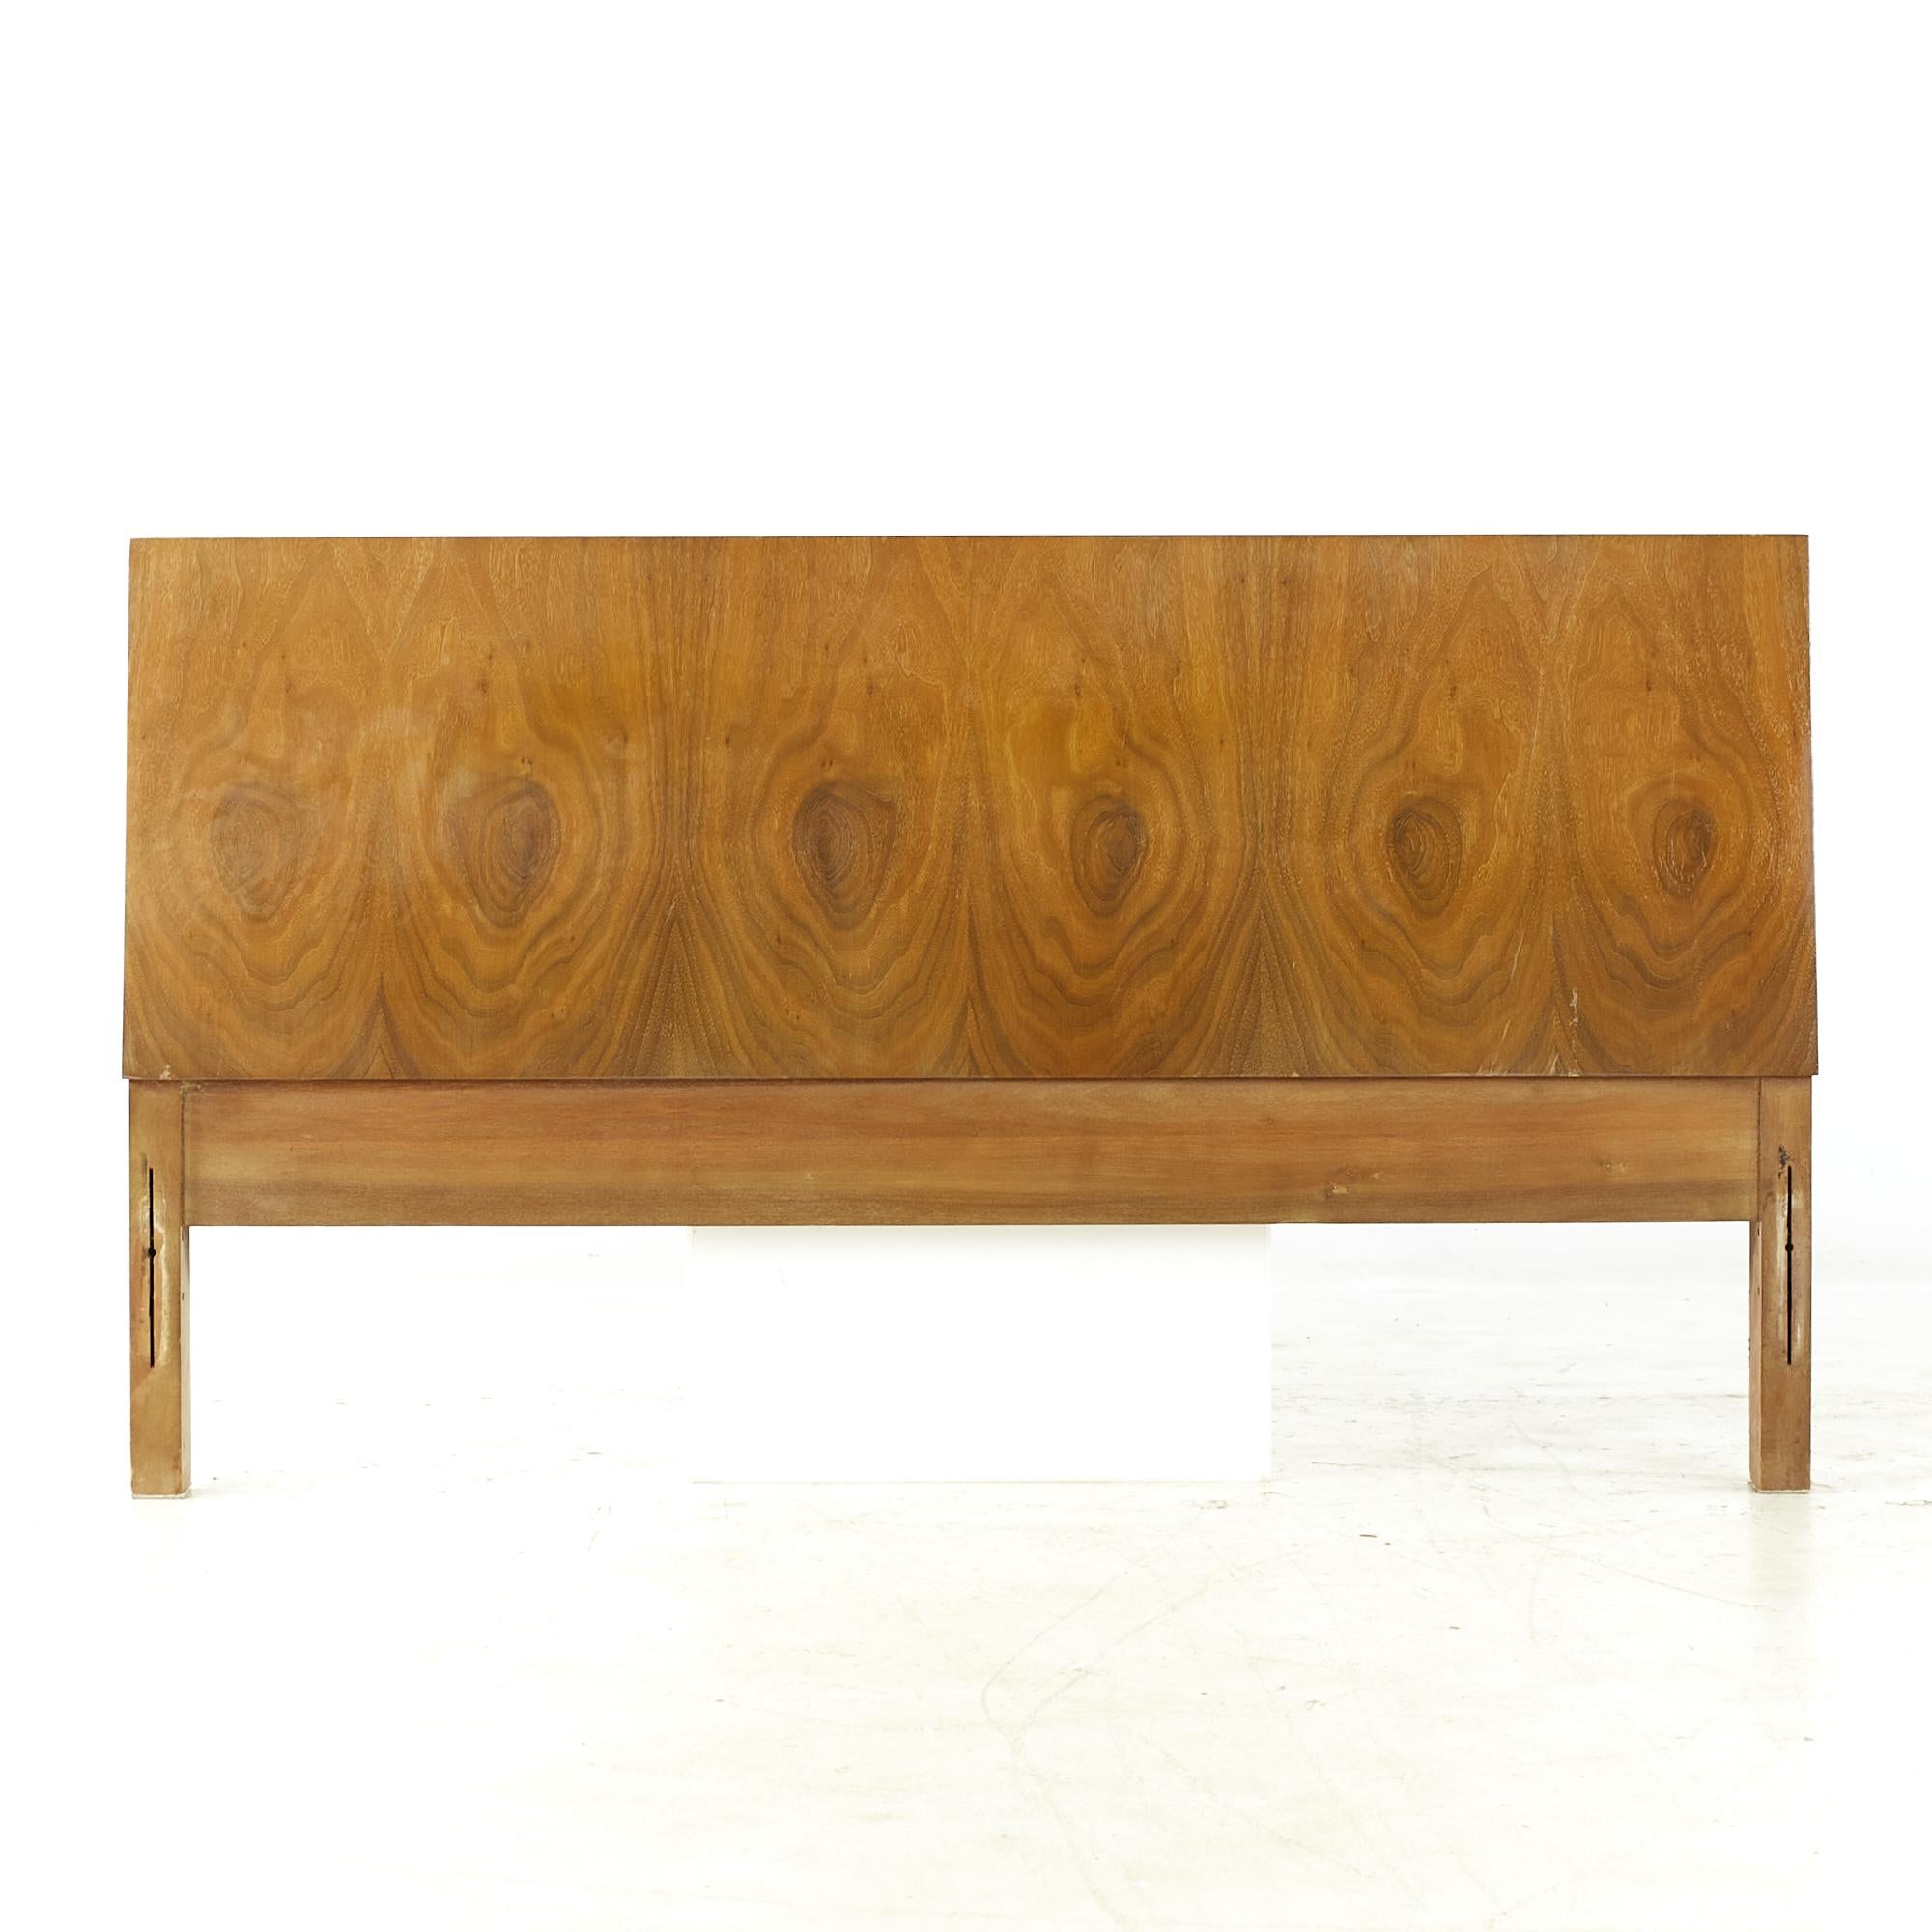 American of Martinsville midcentury Walnut Full Headboard

This headboard measures: 57 wide x 3 deep x 32.25 inches high

All pieces of furniture can be had in what we call restored vintage condition. That means the piece is restored upon